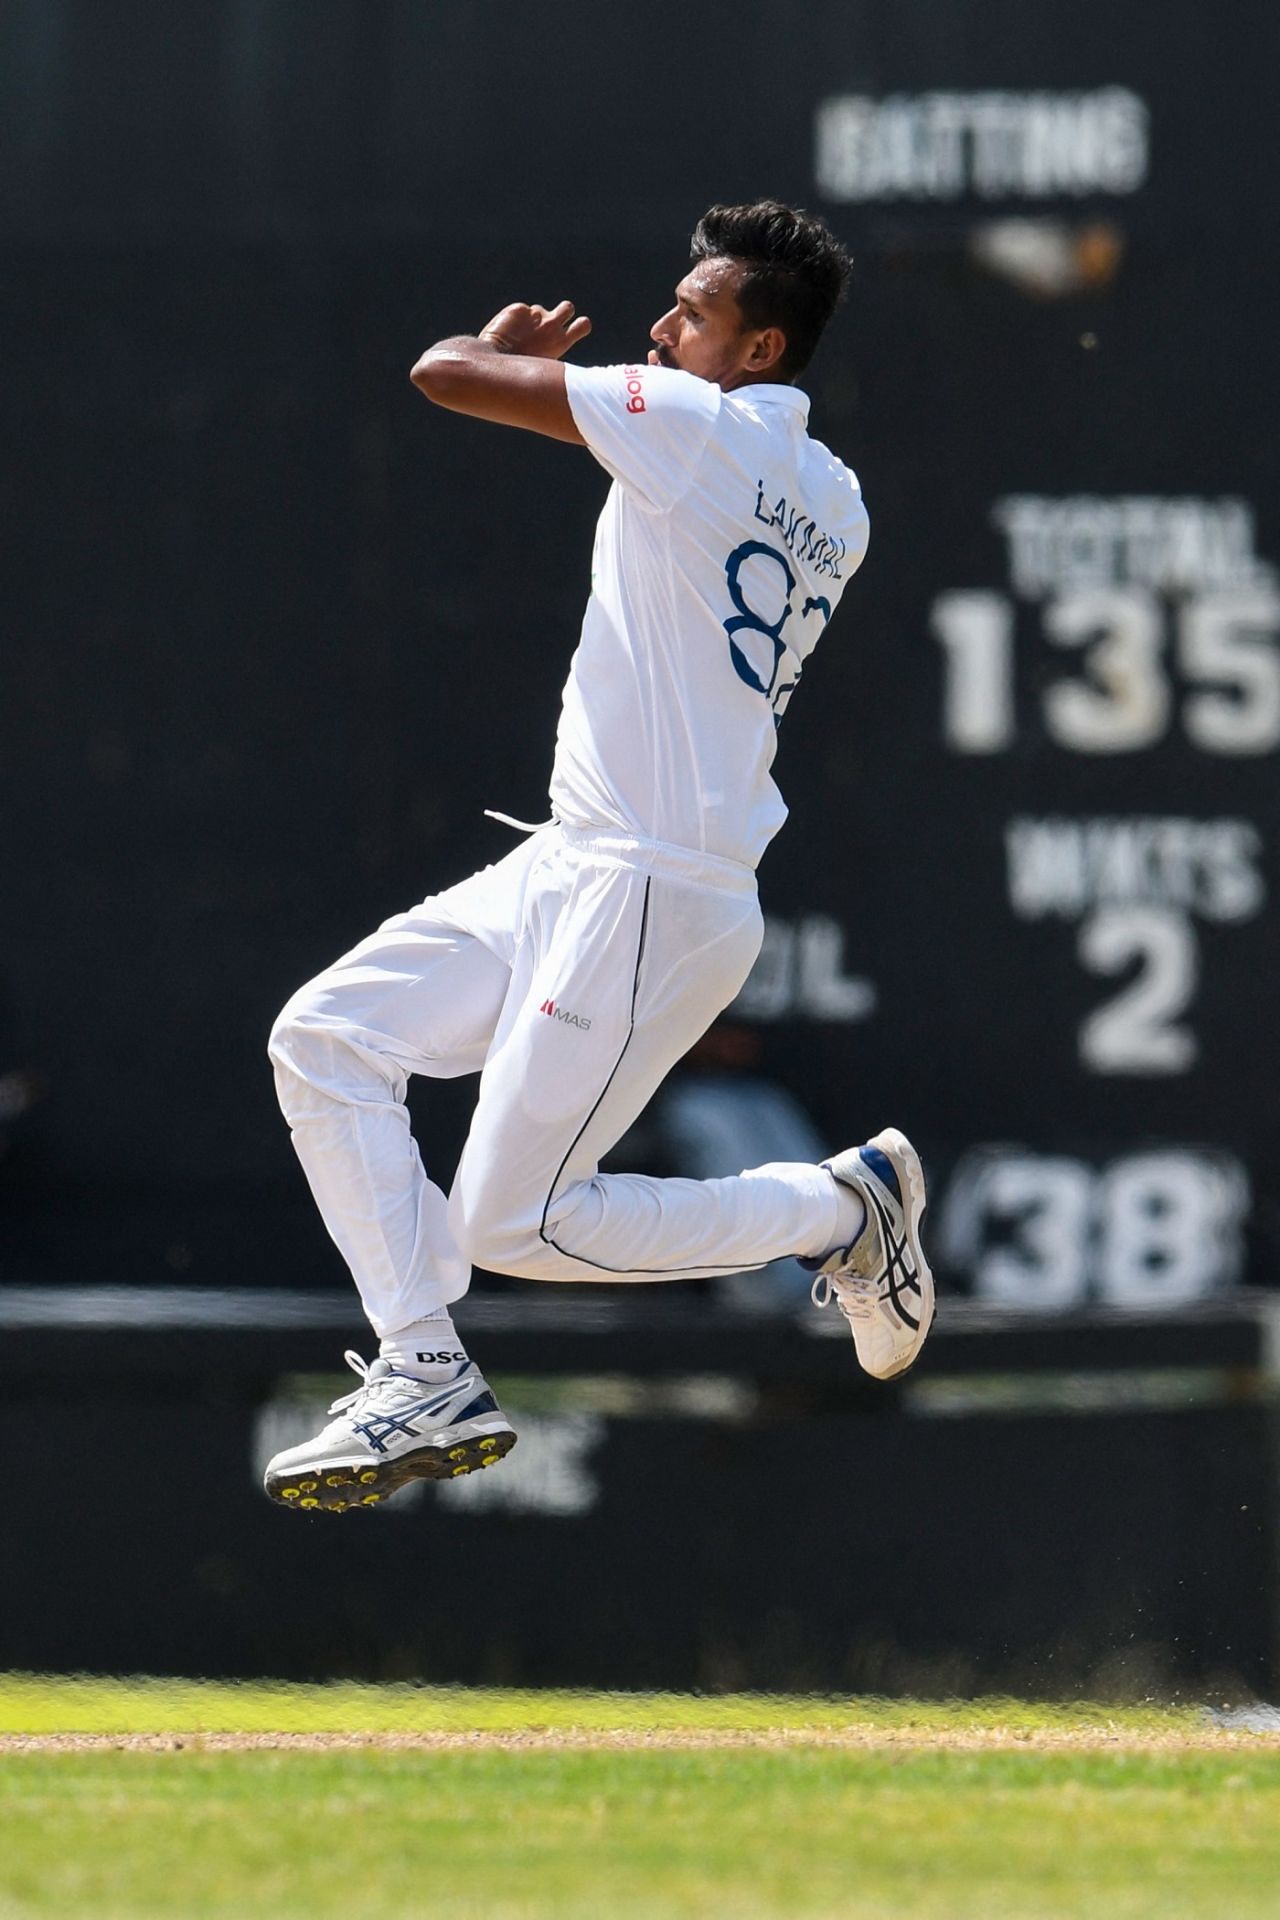 Suranga Lakmal in his pre-delivery stride, West Indies vs Sri Lanka, 2nd Test, North Sound, 4th day, April 1, 2021